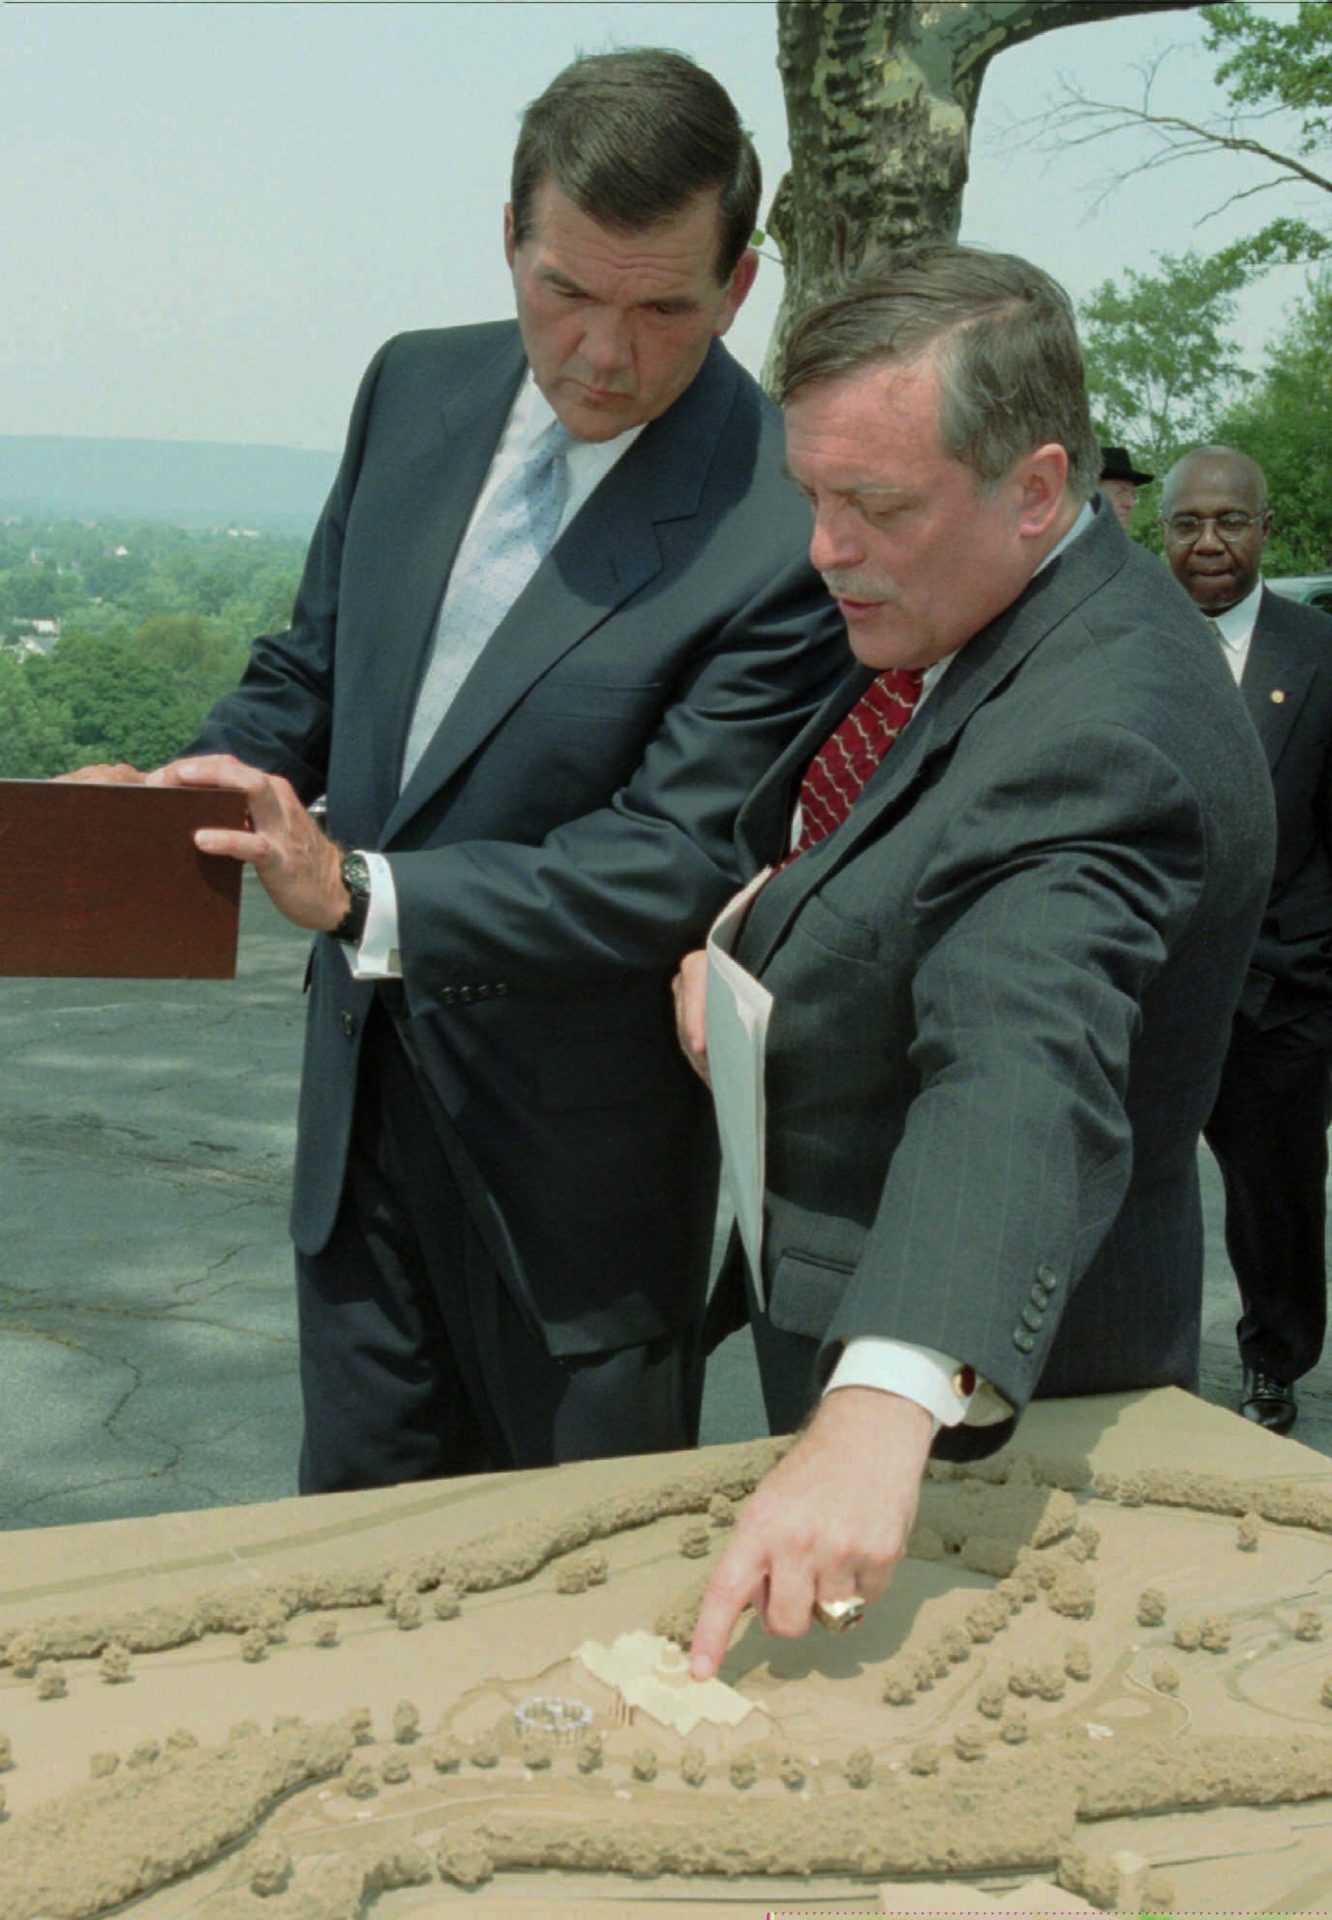 Pennsylvania Gov. Tom Ridge, left , looks on as Harrisburg, Pa. Mayor Stephen Reed shows him a model of the National Civil War Museum during a news conference in Harrisburg, Pa. Wednesday, July 28, 1999. The Museum will be built in Reservior Park in Harrisburg